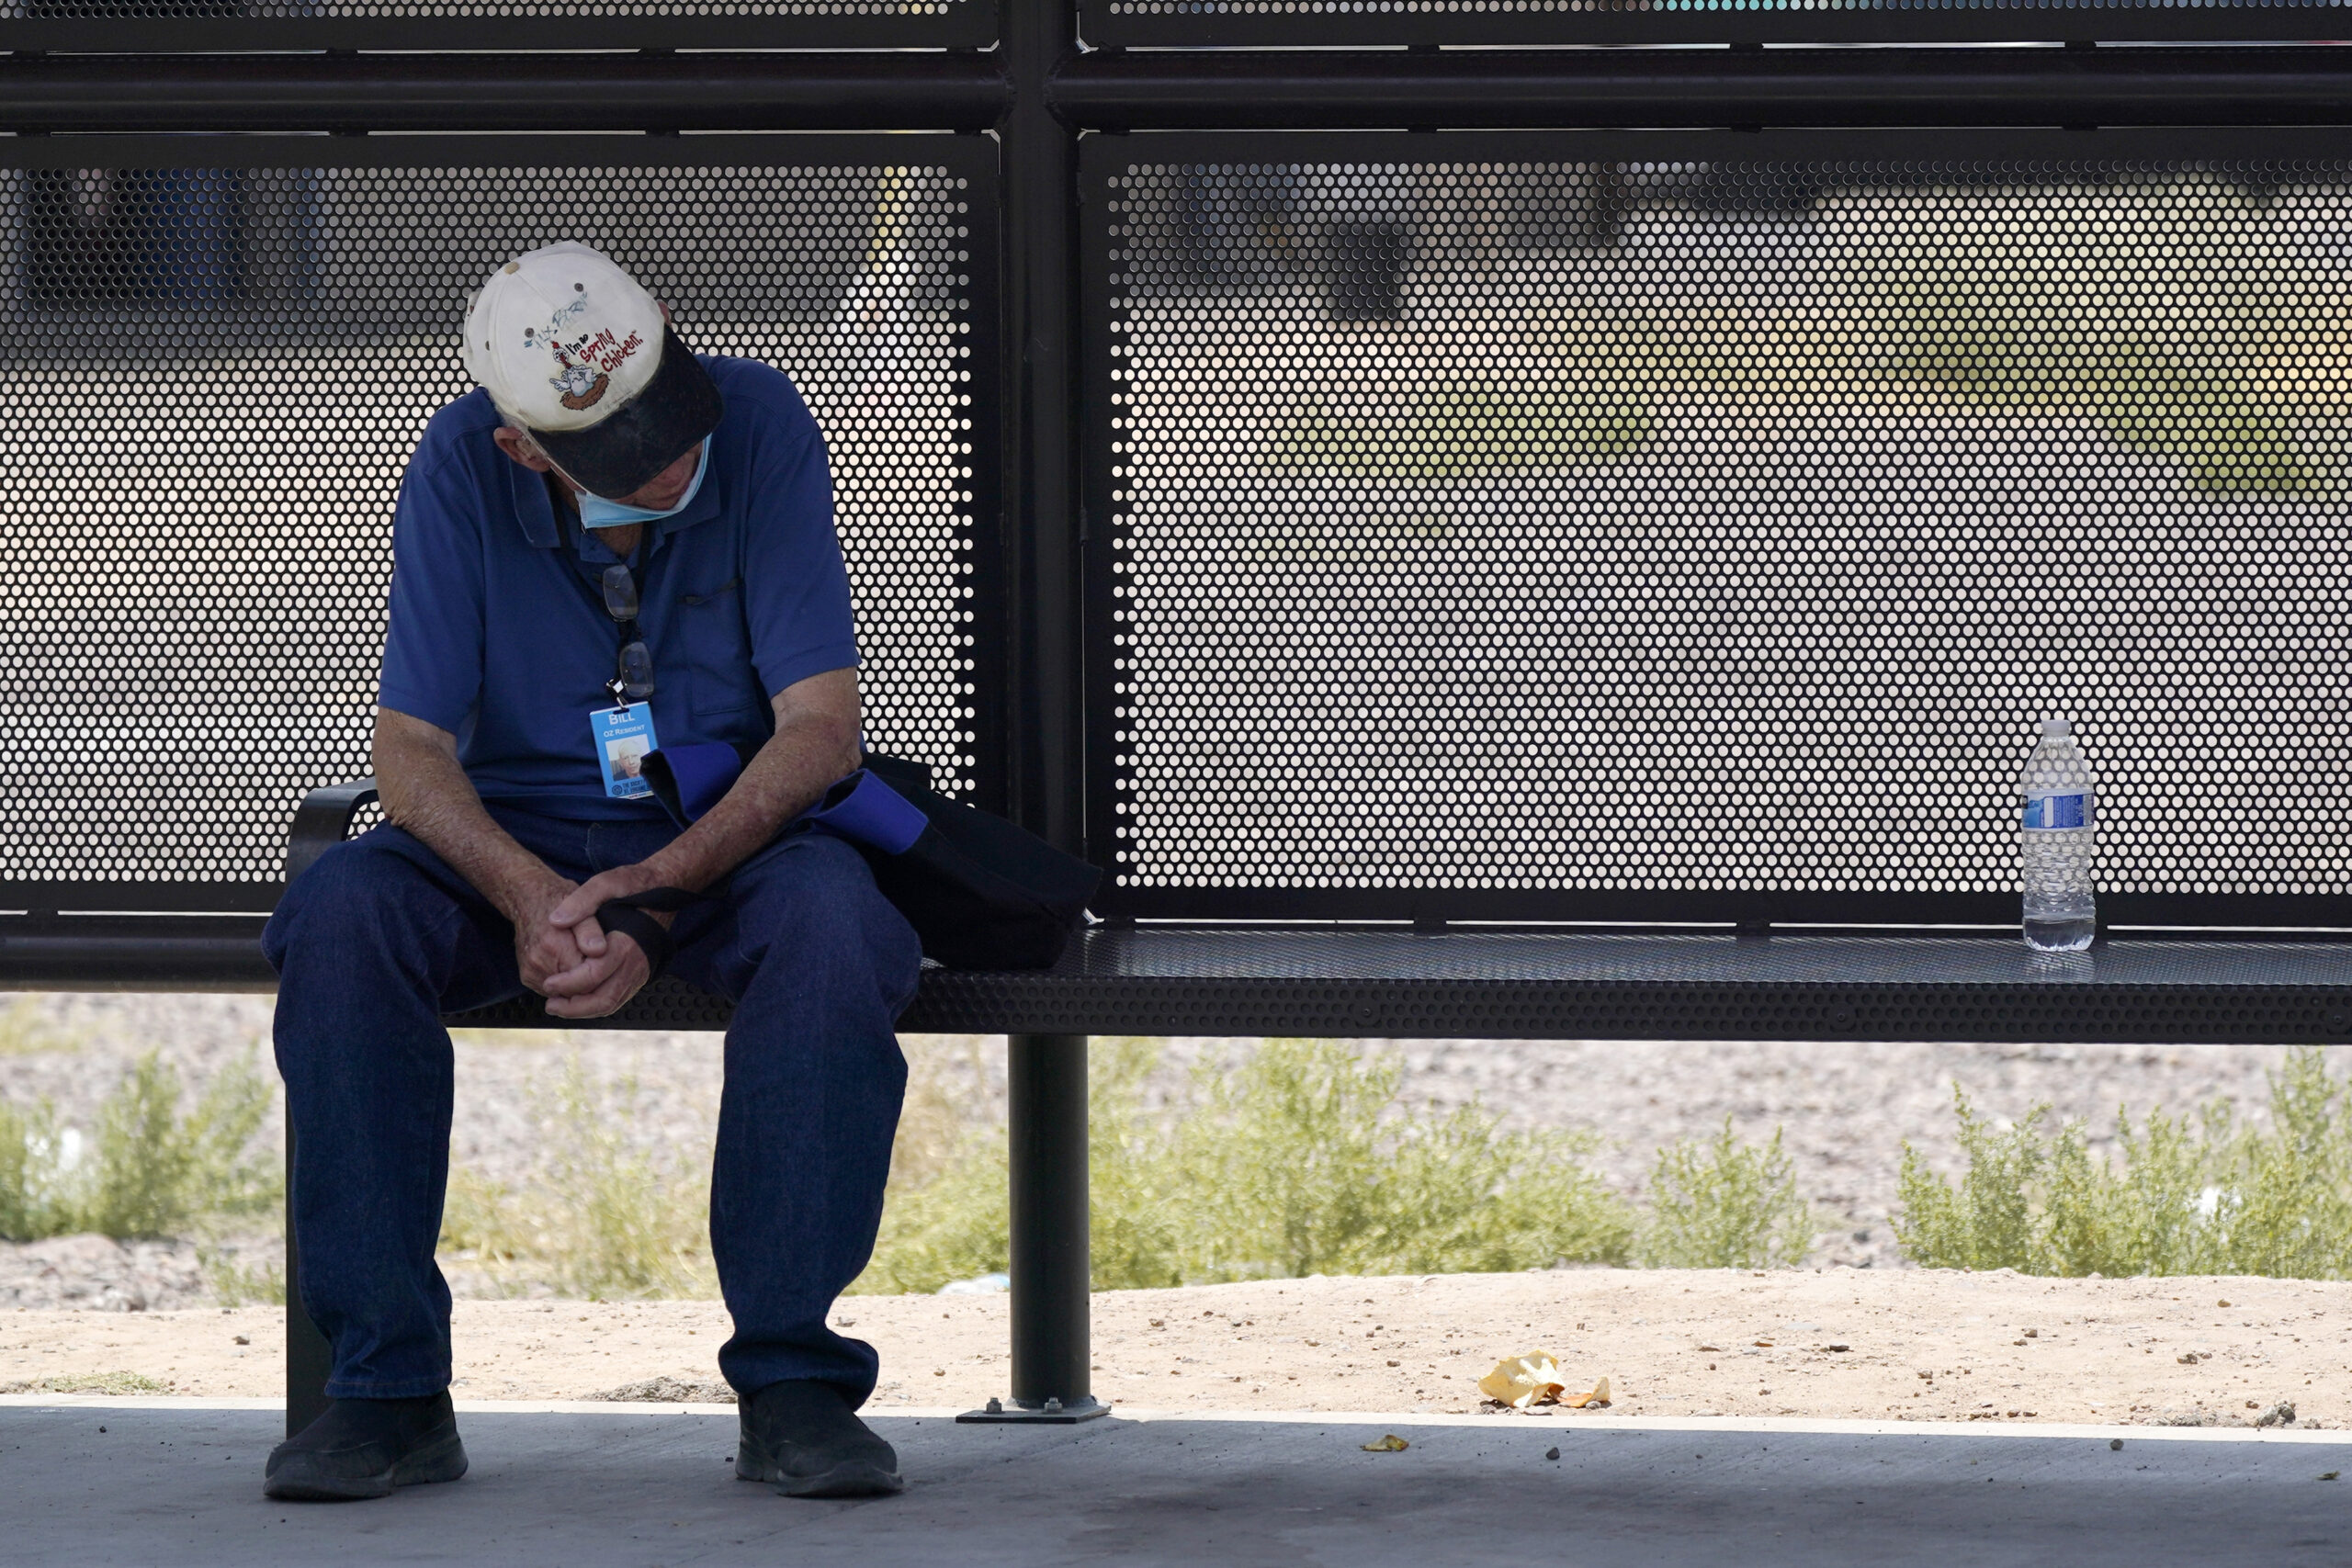 A person waits for a bus in the shade as the heat wave in the Western states continues Thursday, June 17, 2021, in Phoenix. (AP Photo/Ross D. Franklin)